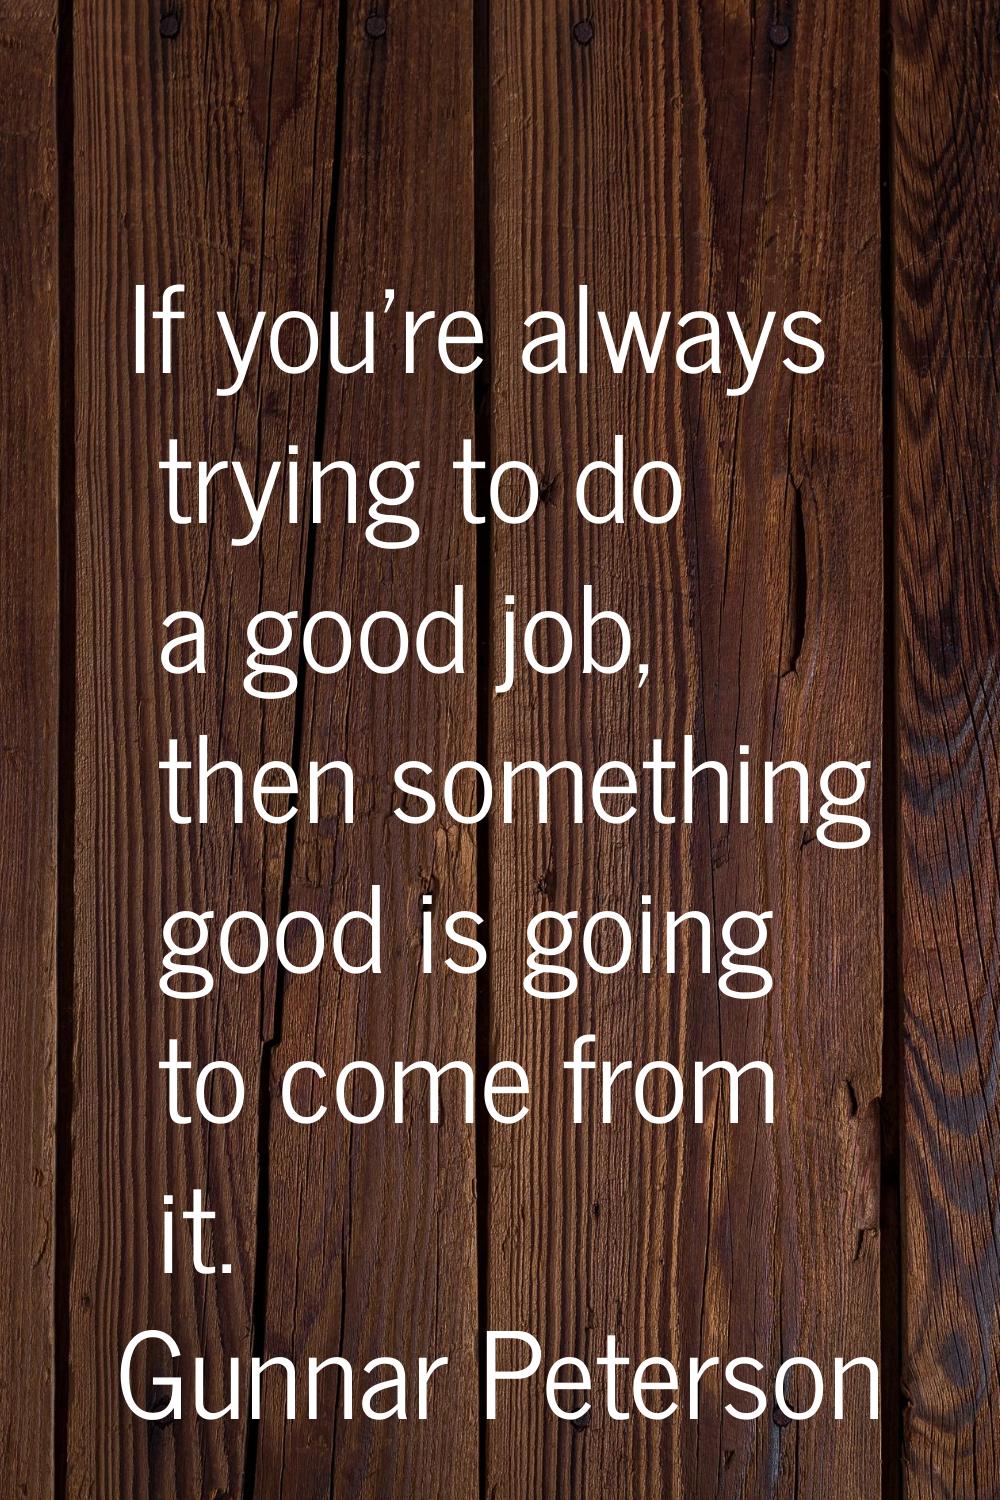 If you're always trying to do a good job, then something good is going to come from it.